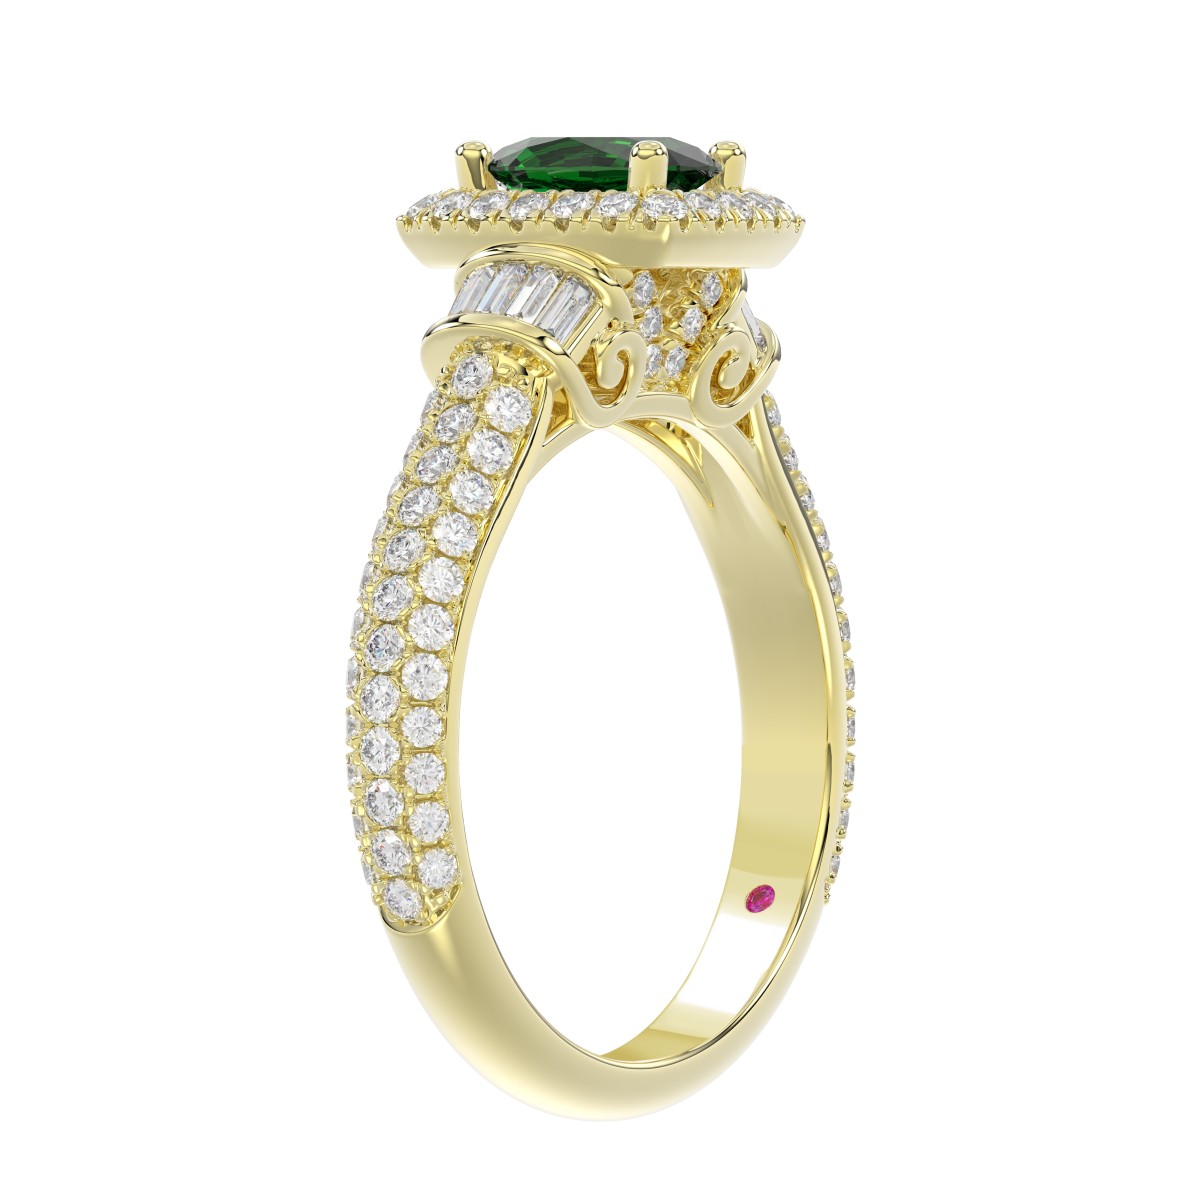 14K YELLOW GOLD 1 1/2CT ROUND/BAGUETTE/OVAL DIAMOND LADIES FASHION RING(COLOR STONE OVAL GREEN EMERALD DIAMOND 3/4CT)